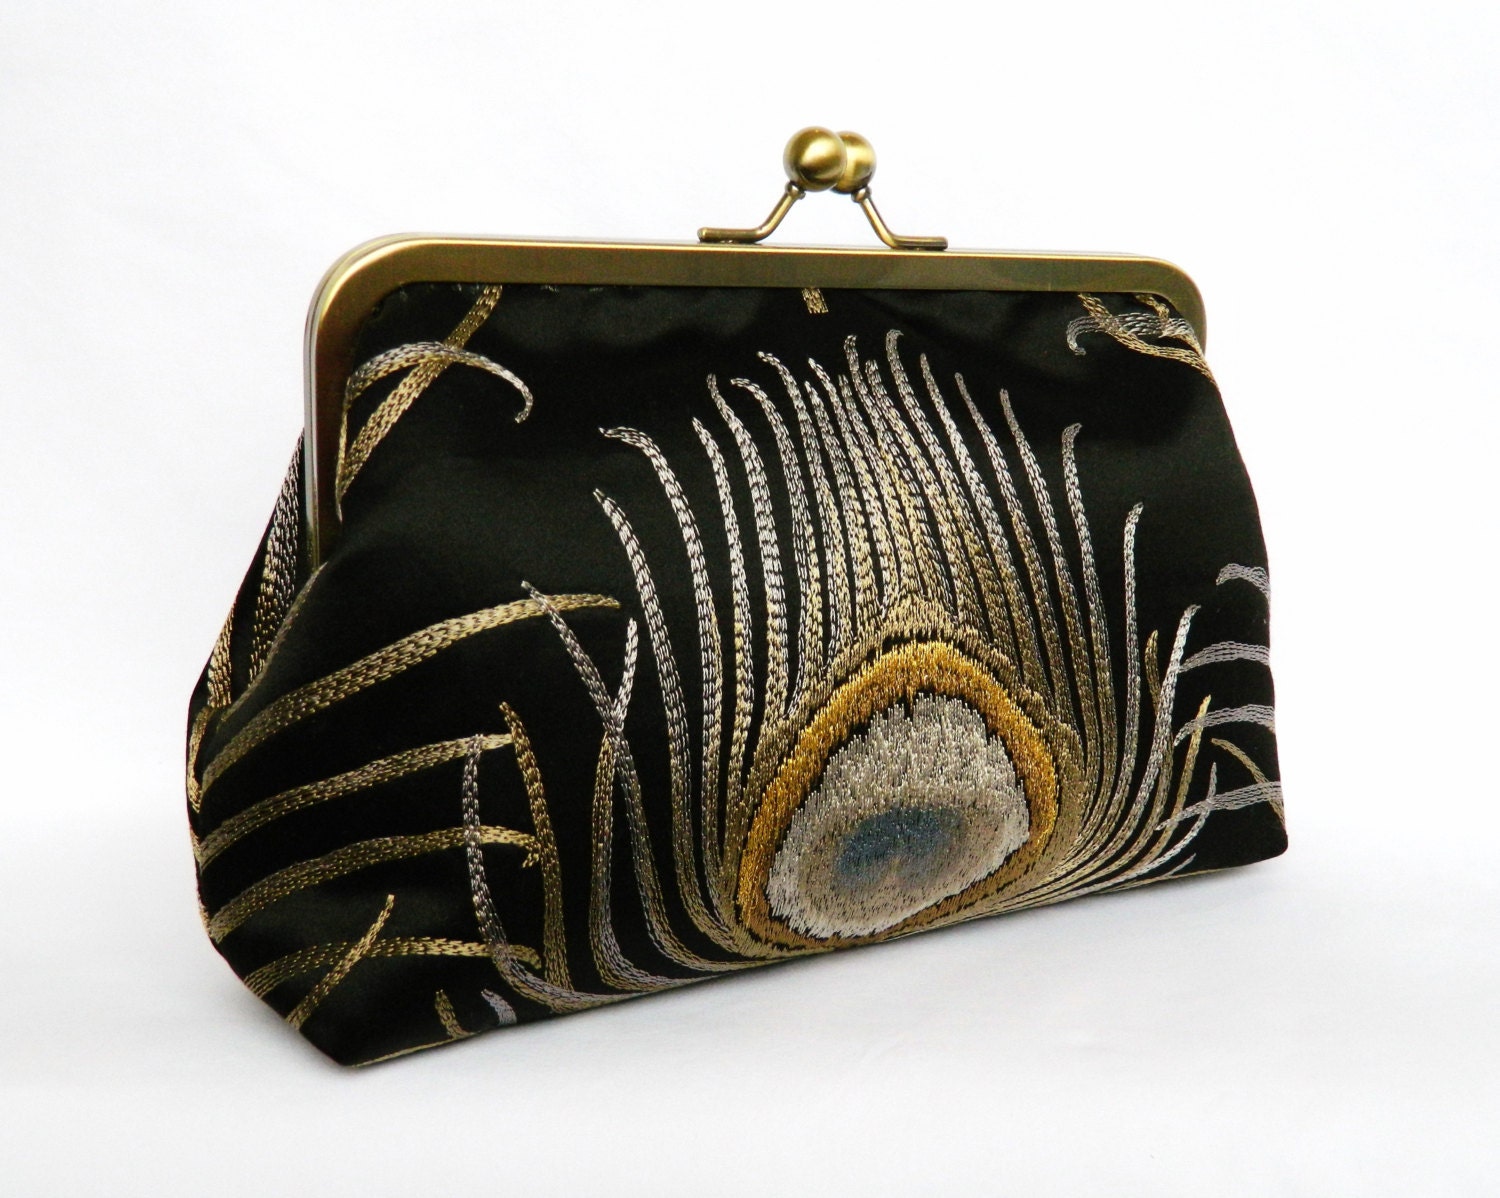 Clutch purse Wedding Clutch Purse Black and Gold by TheHeartLabel